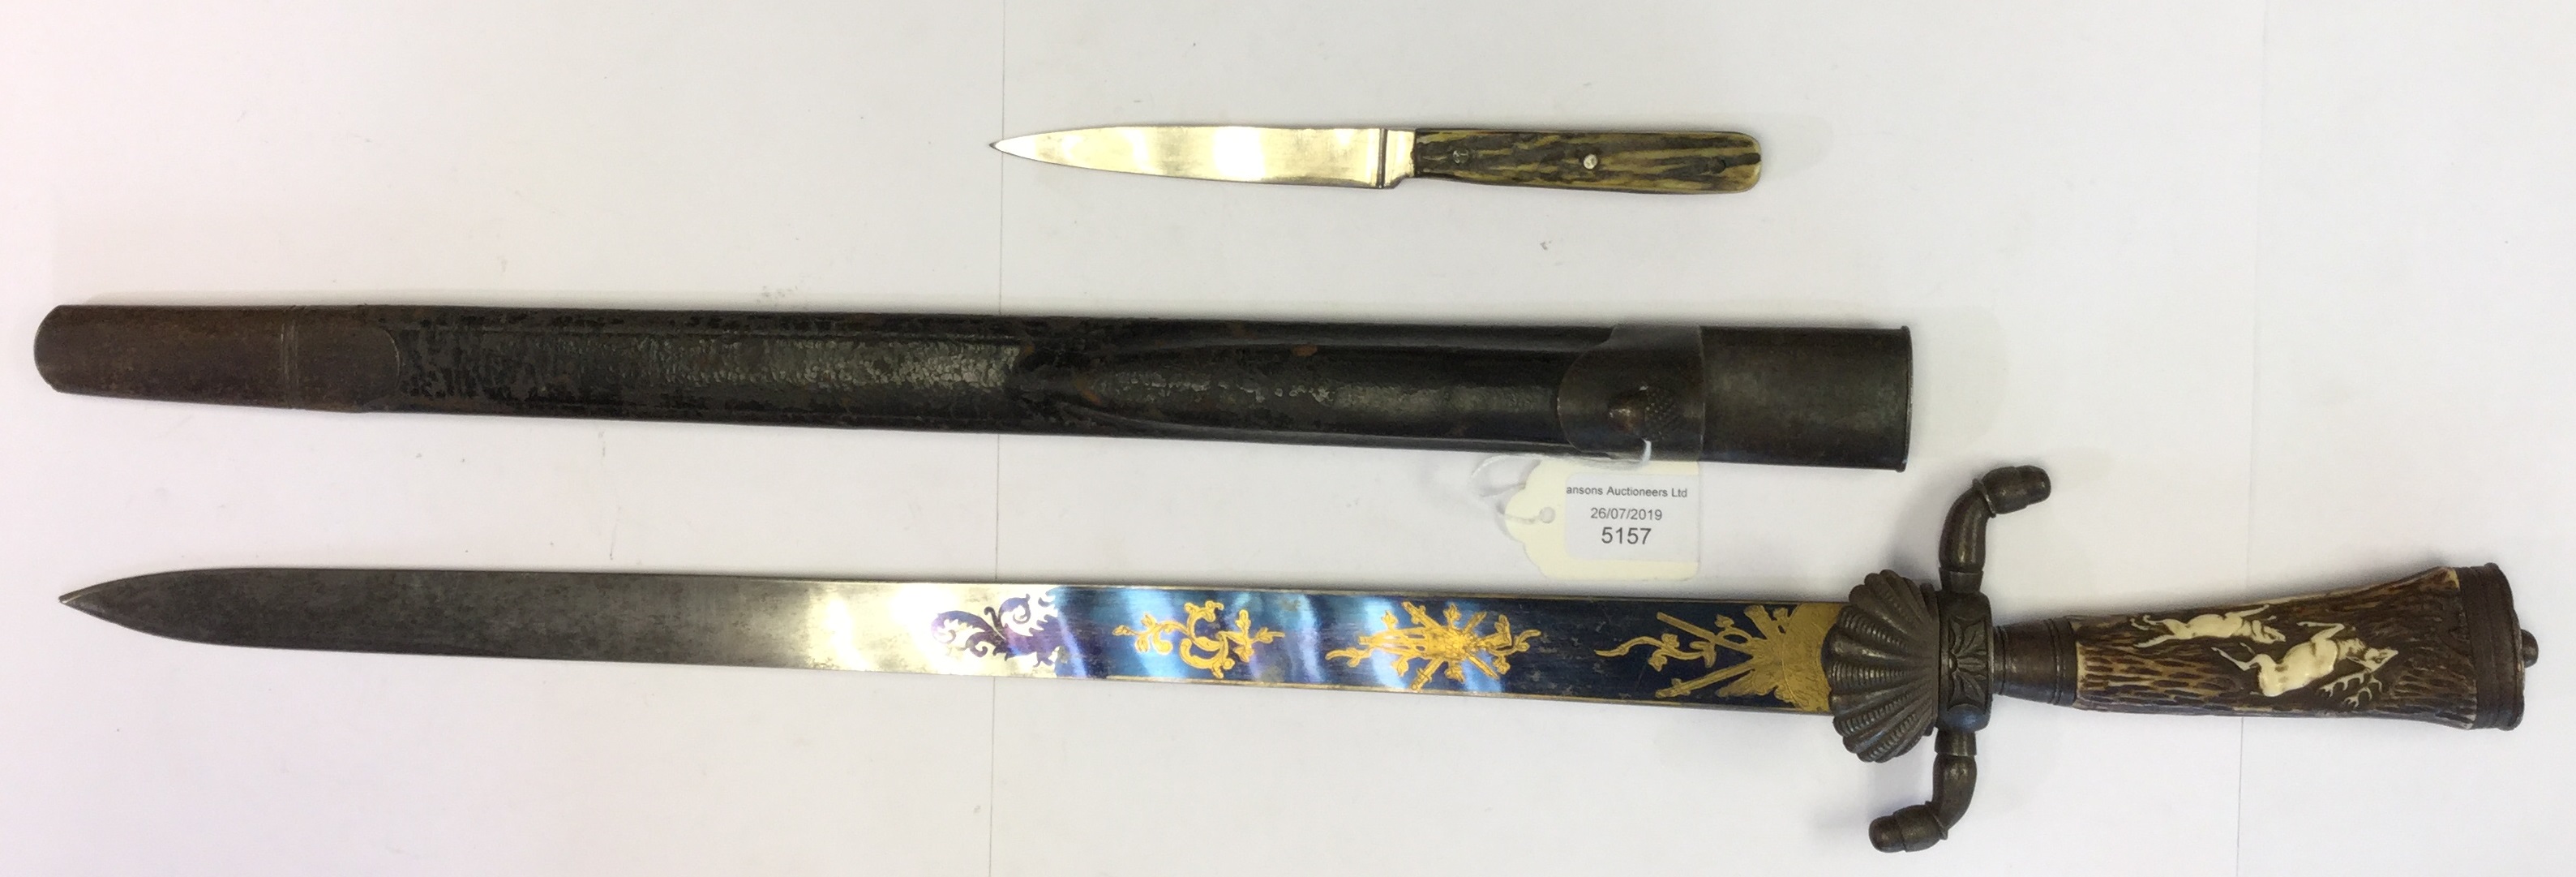 19th Century German Hunting Sword with blued and gilded panel to both sides of the 46cm long blade